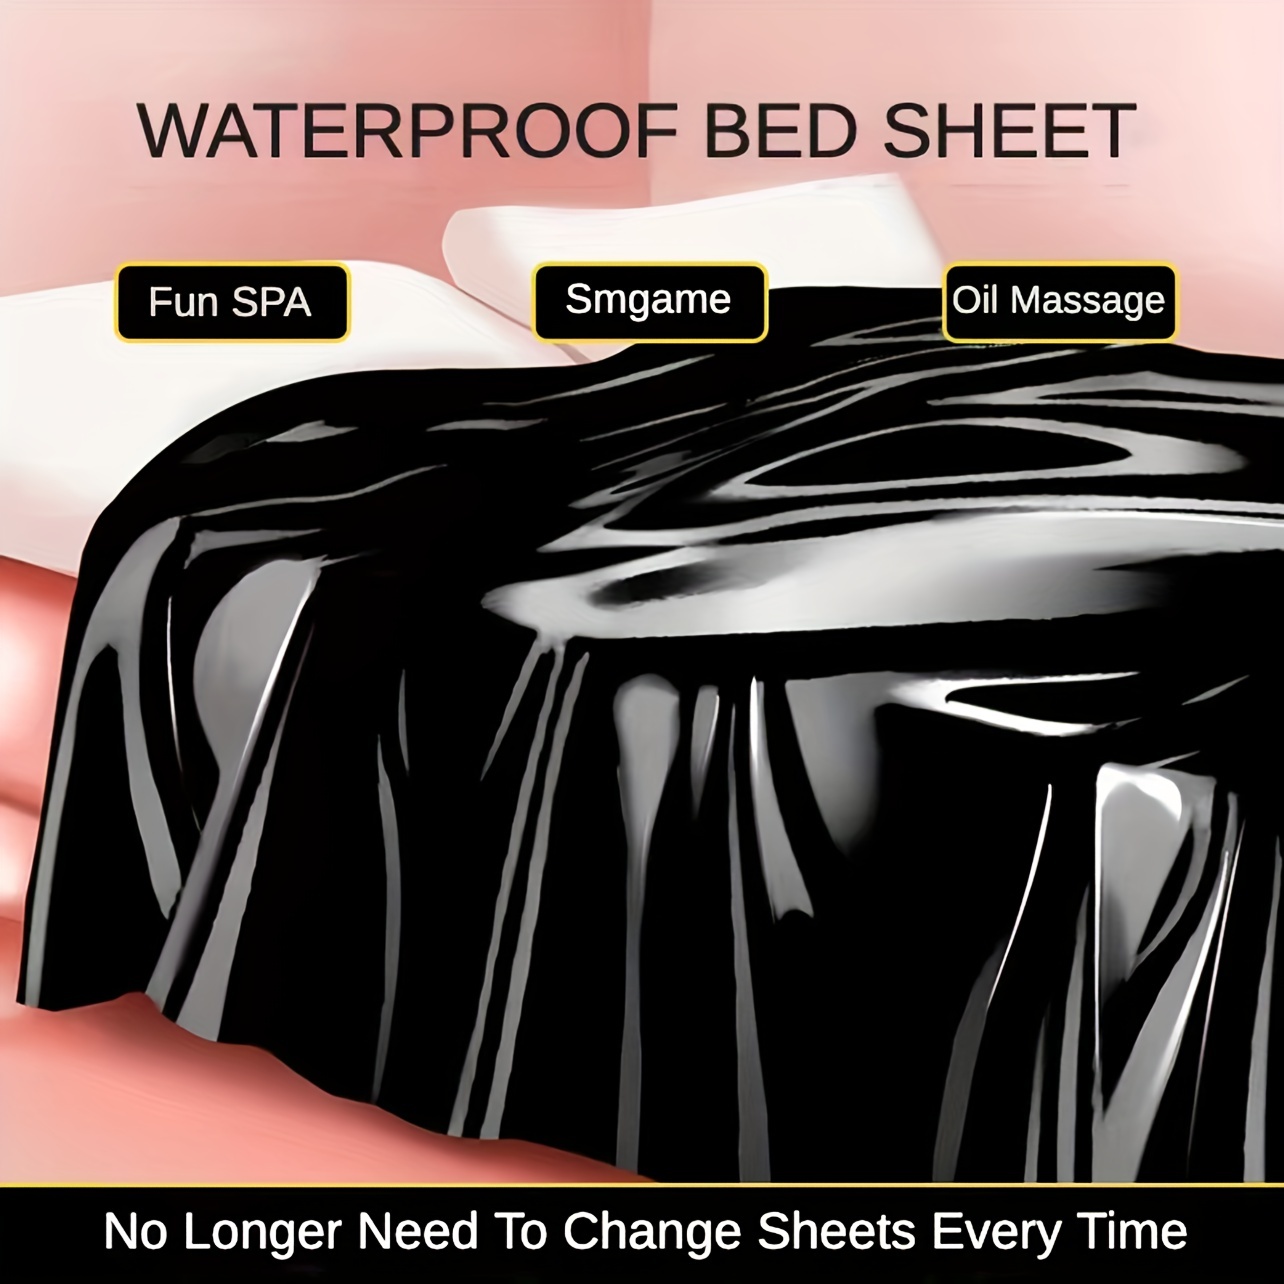 BDSM Waterproof Adult Sex Bed Sheets, Mess-Proof Play Sheet for  Adults,Versatile Waterproof Bed Mattress Cover for Couple Messy Play and  Bed